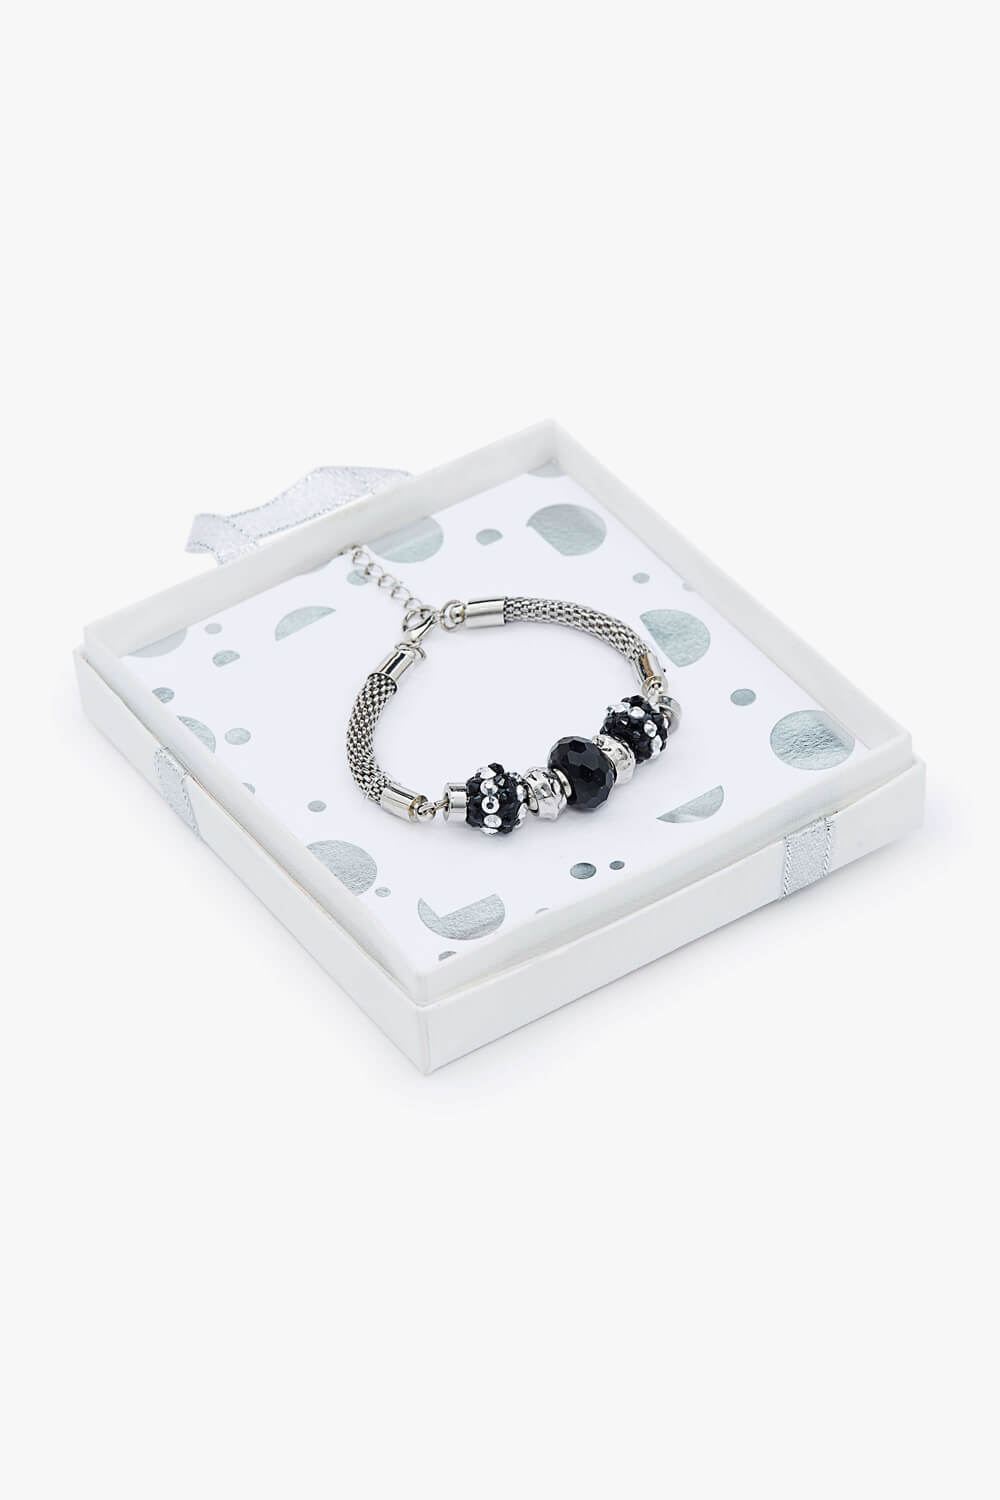 Silver Textured Charm Bead Bracelet, Image 5 of 6